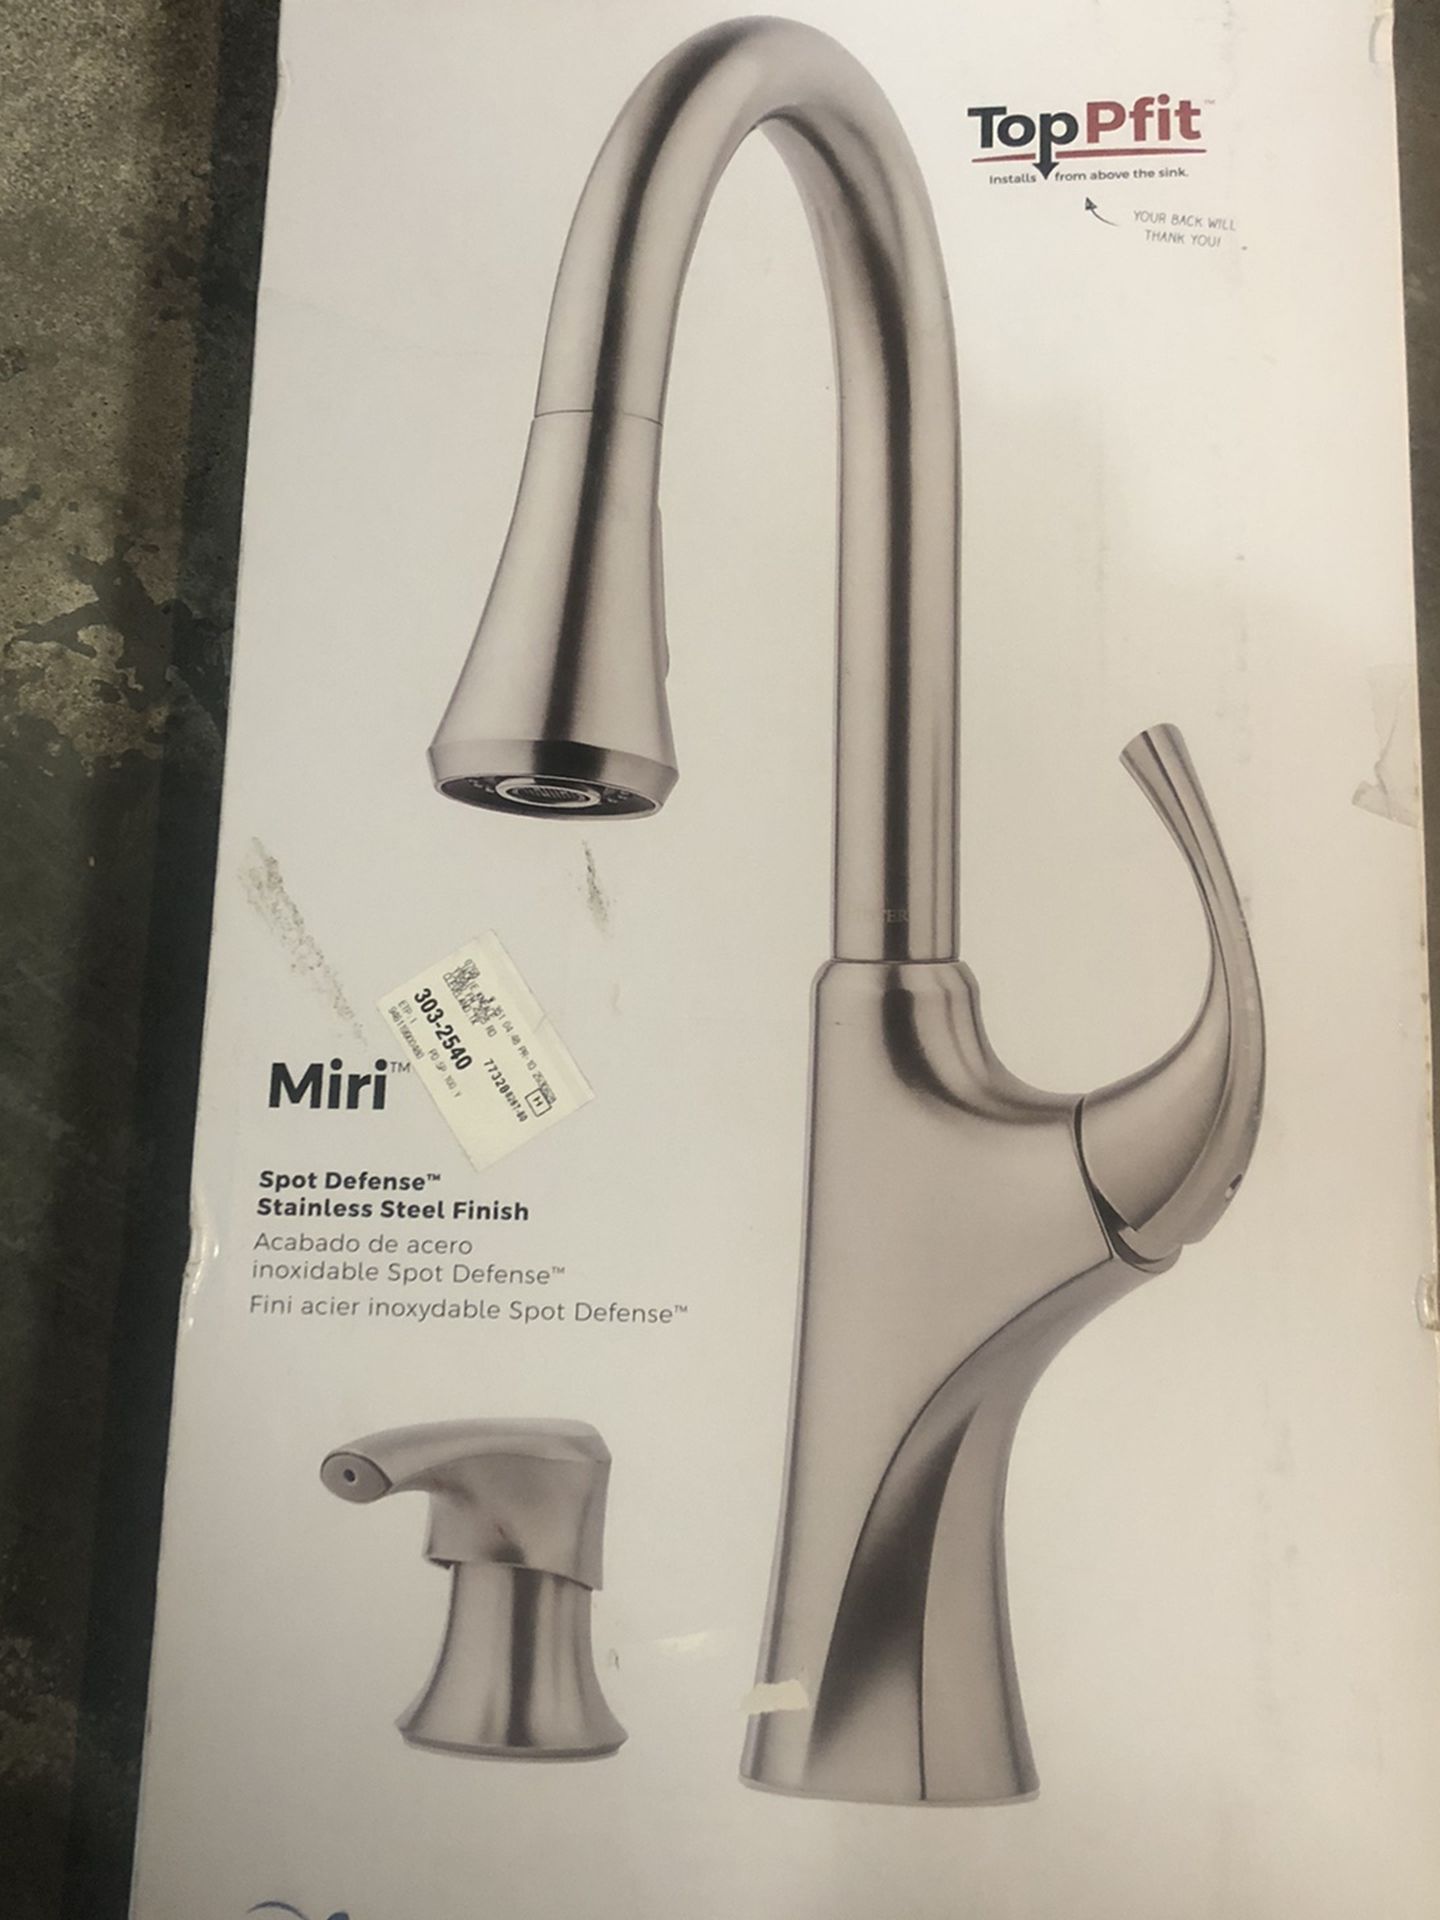 Pfister Miri Single-Handle Pull-Down Sprayer Kitchen Faucet with Soap Dispenser in Spot Defense Stainless Steel